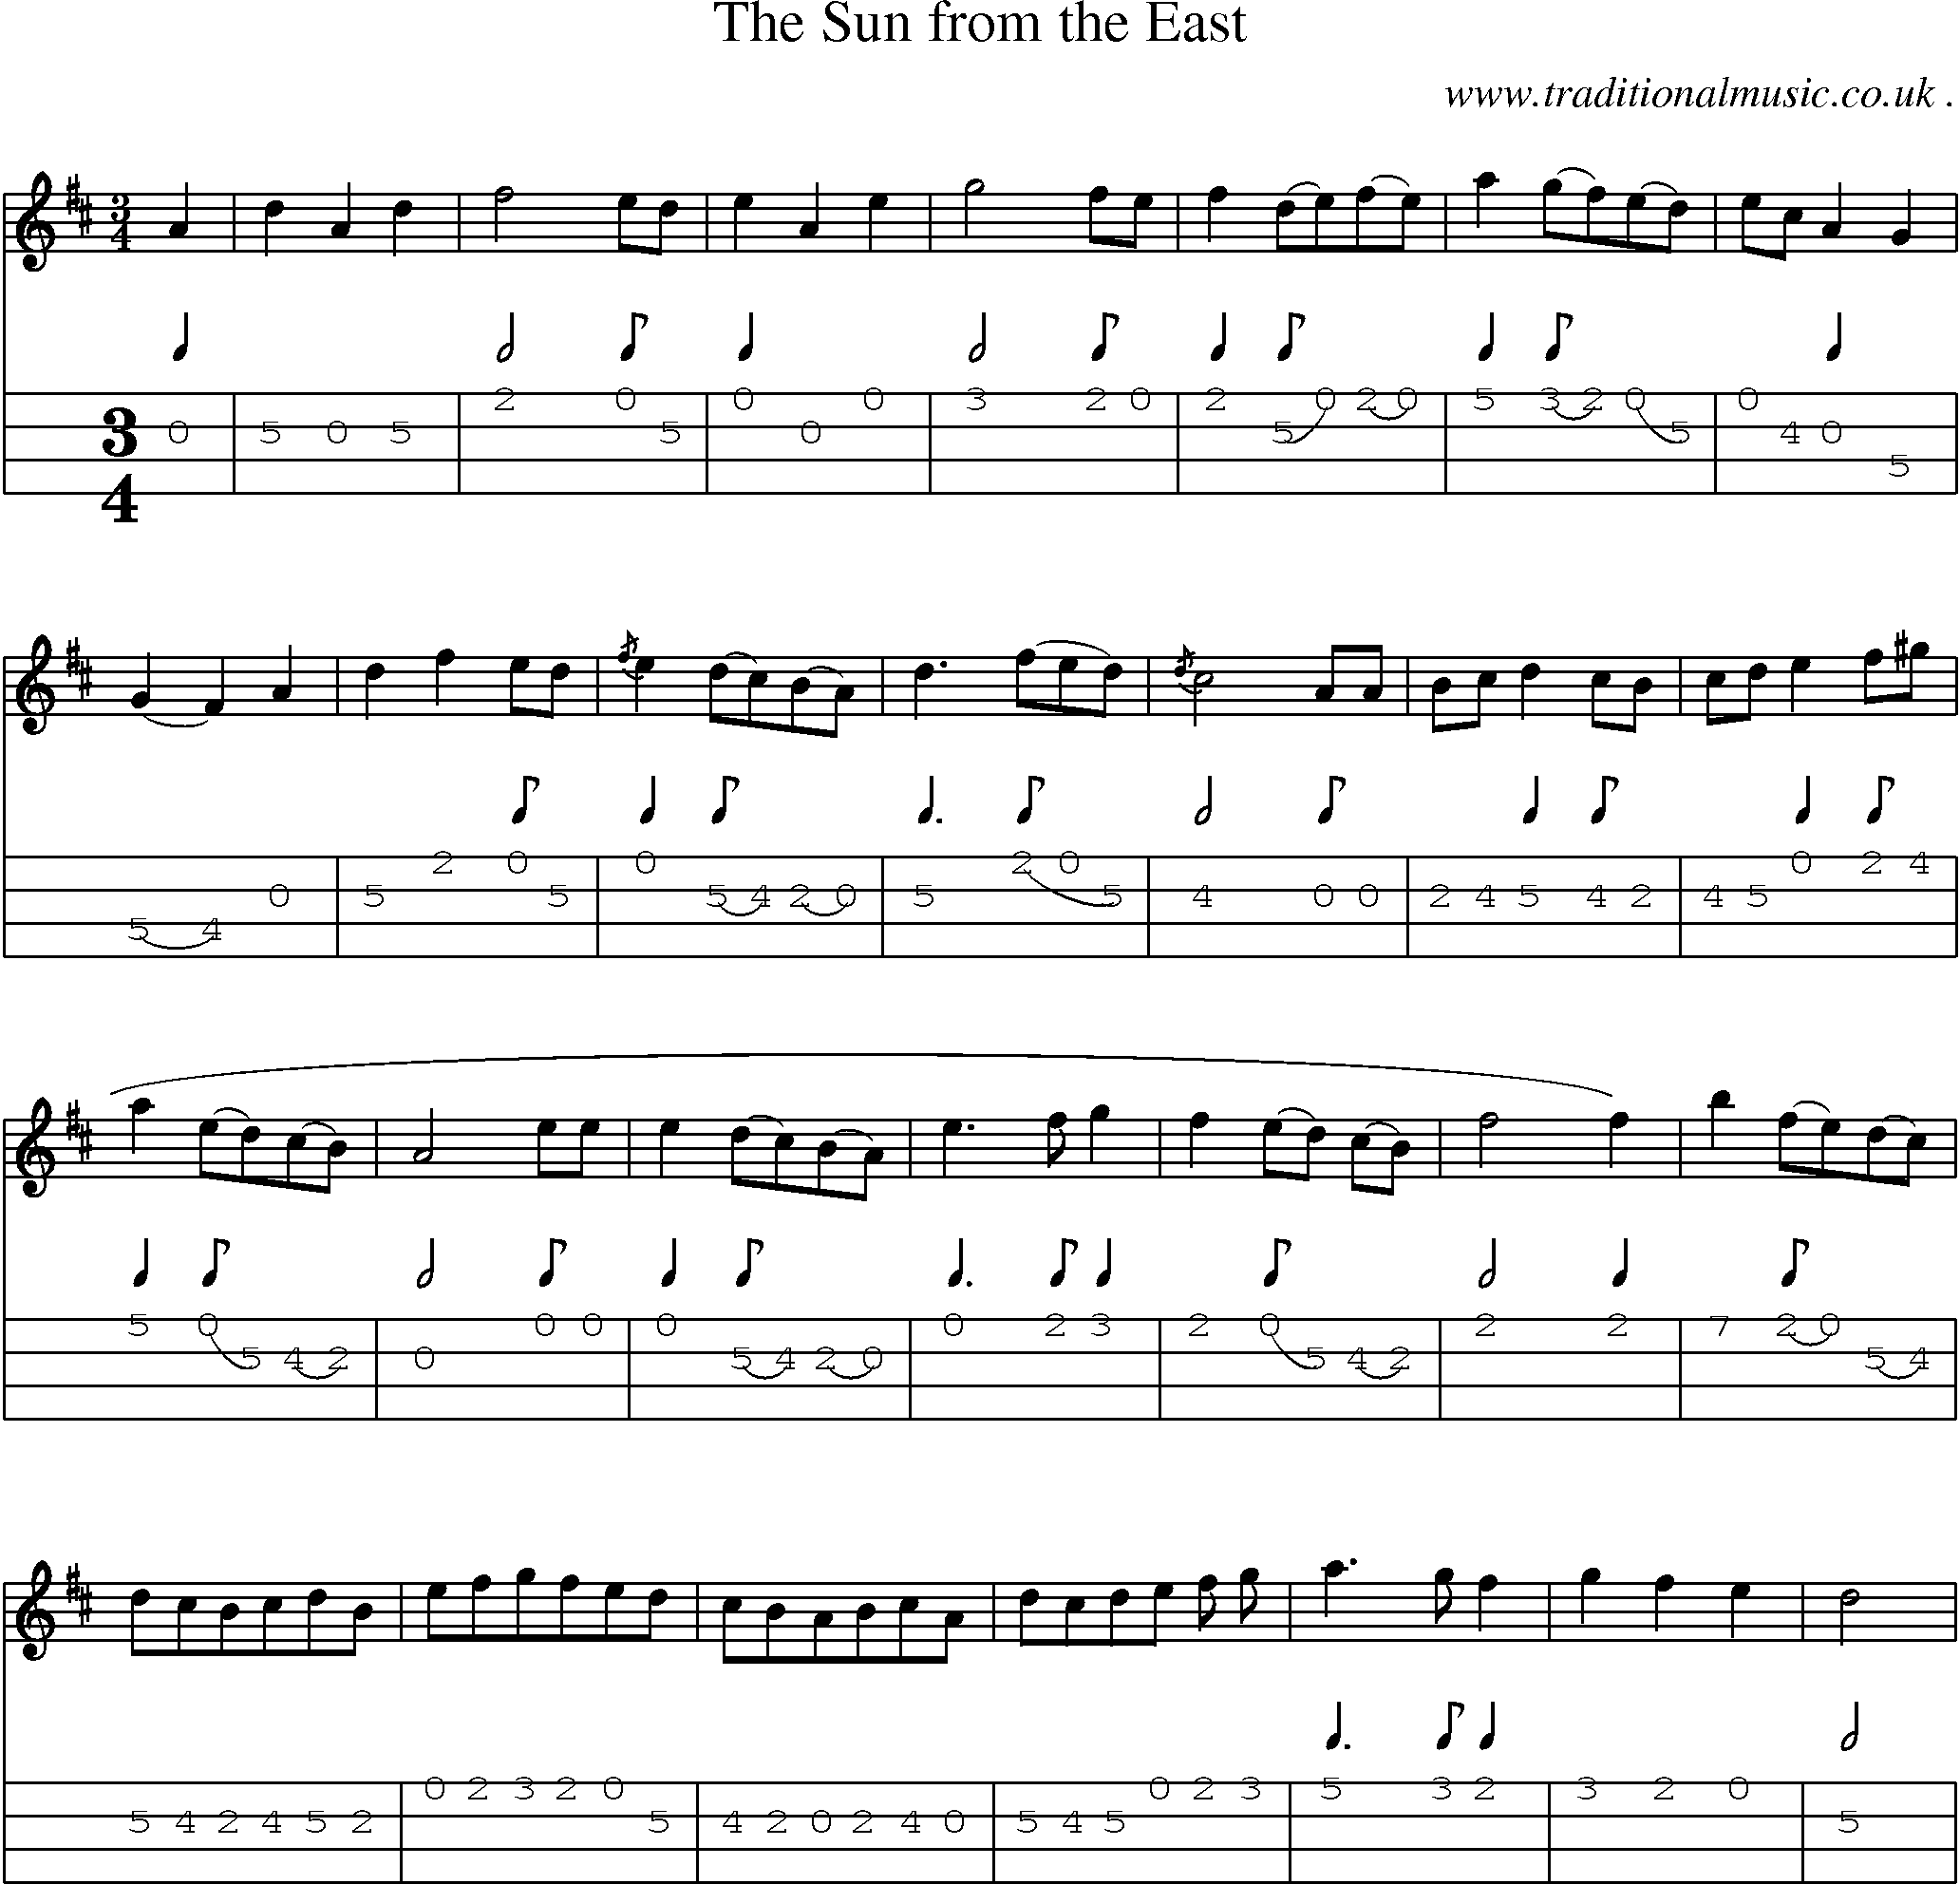 Sheet-music  score, Chords and Mandolin Tabs for The Sun From The East